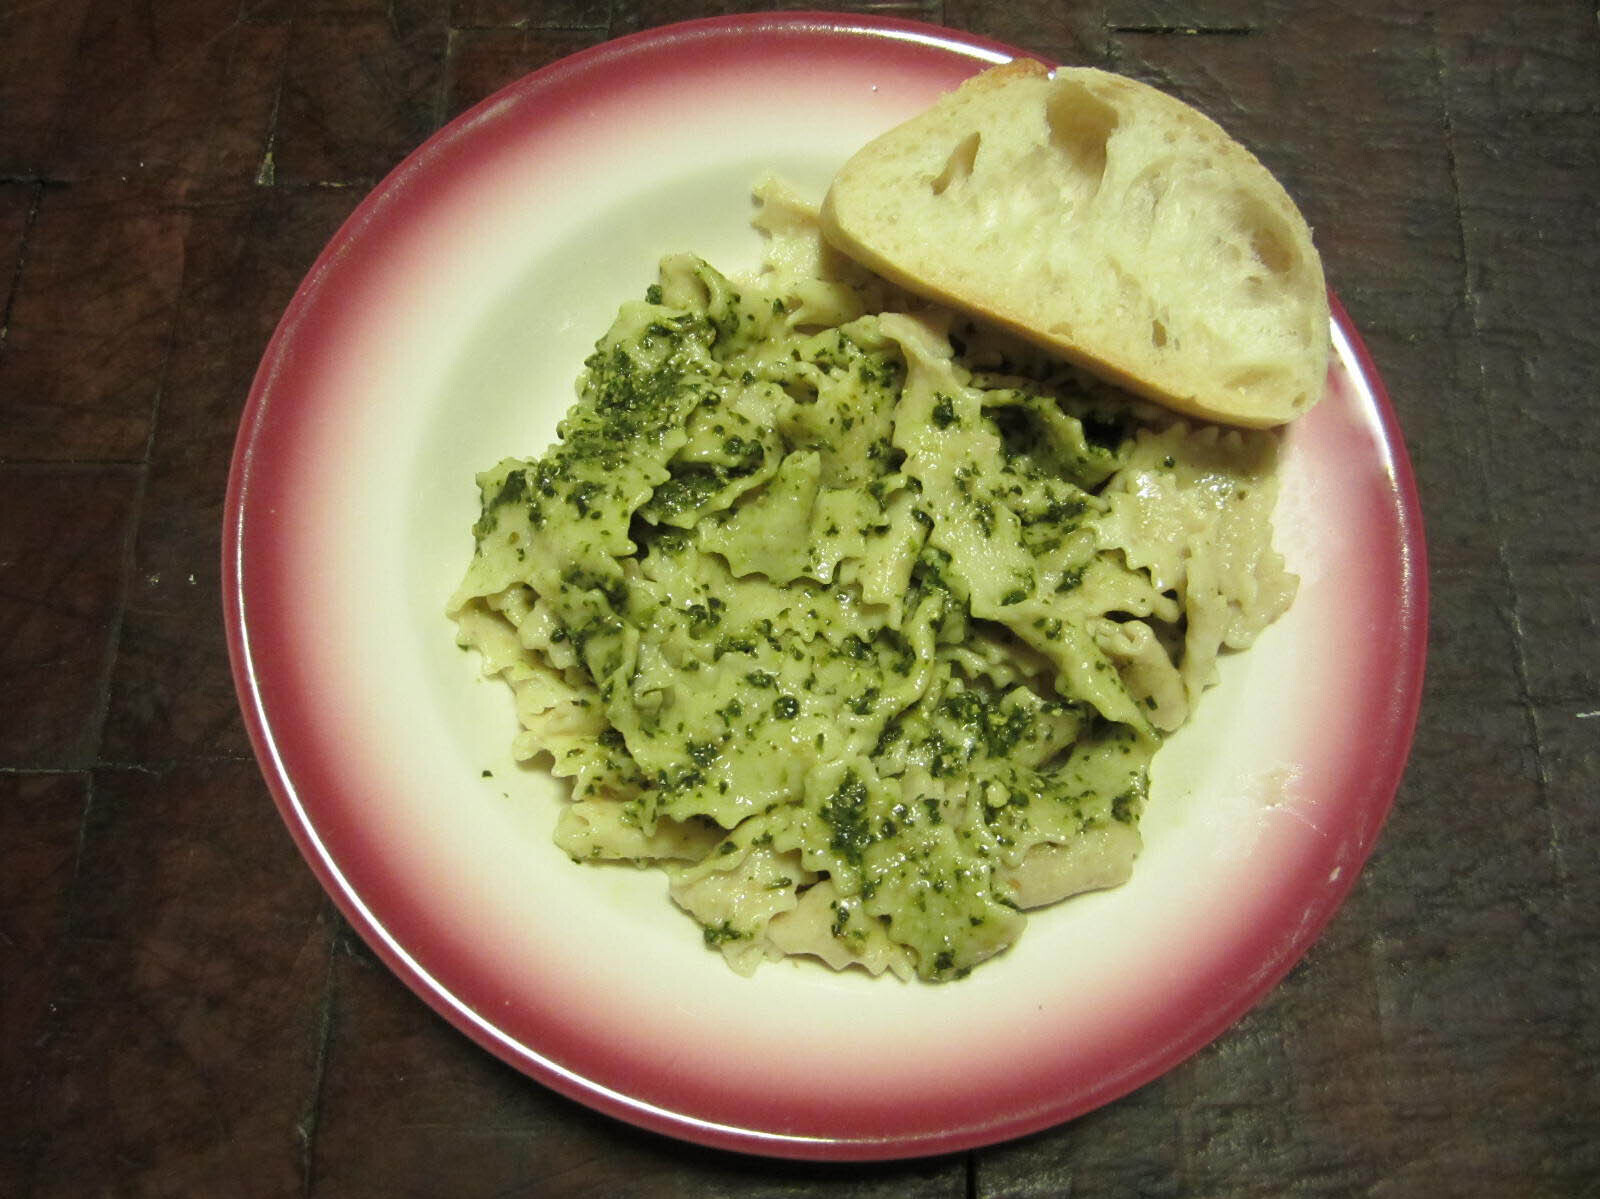 A plate of homemade fettuccine with pesto